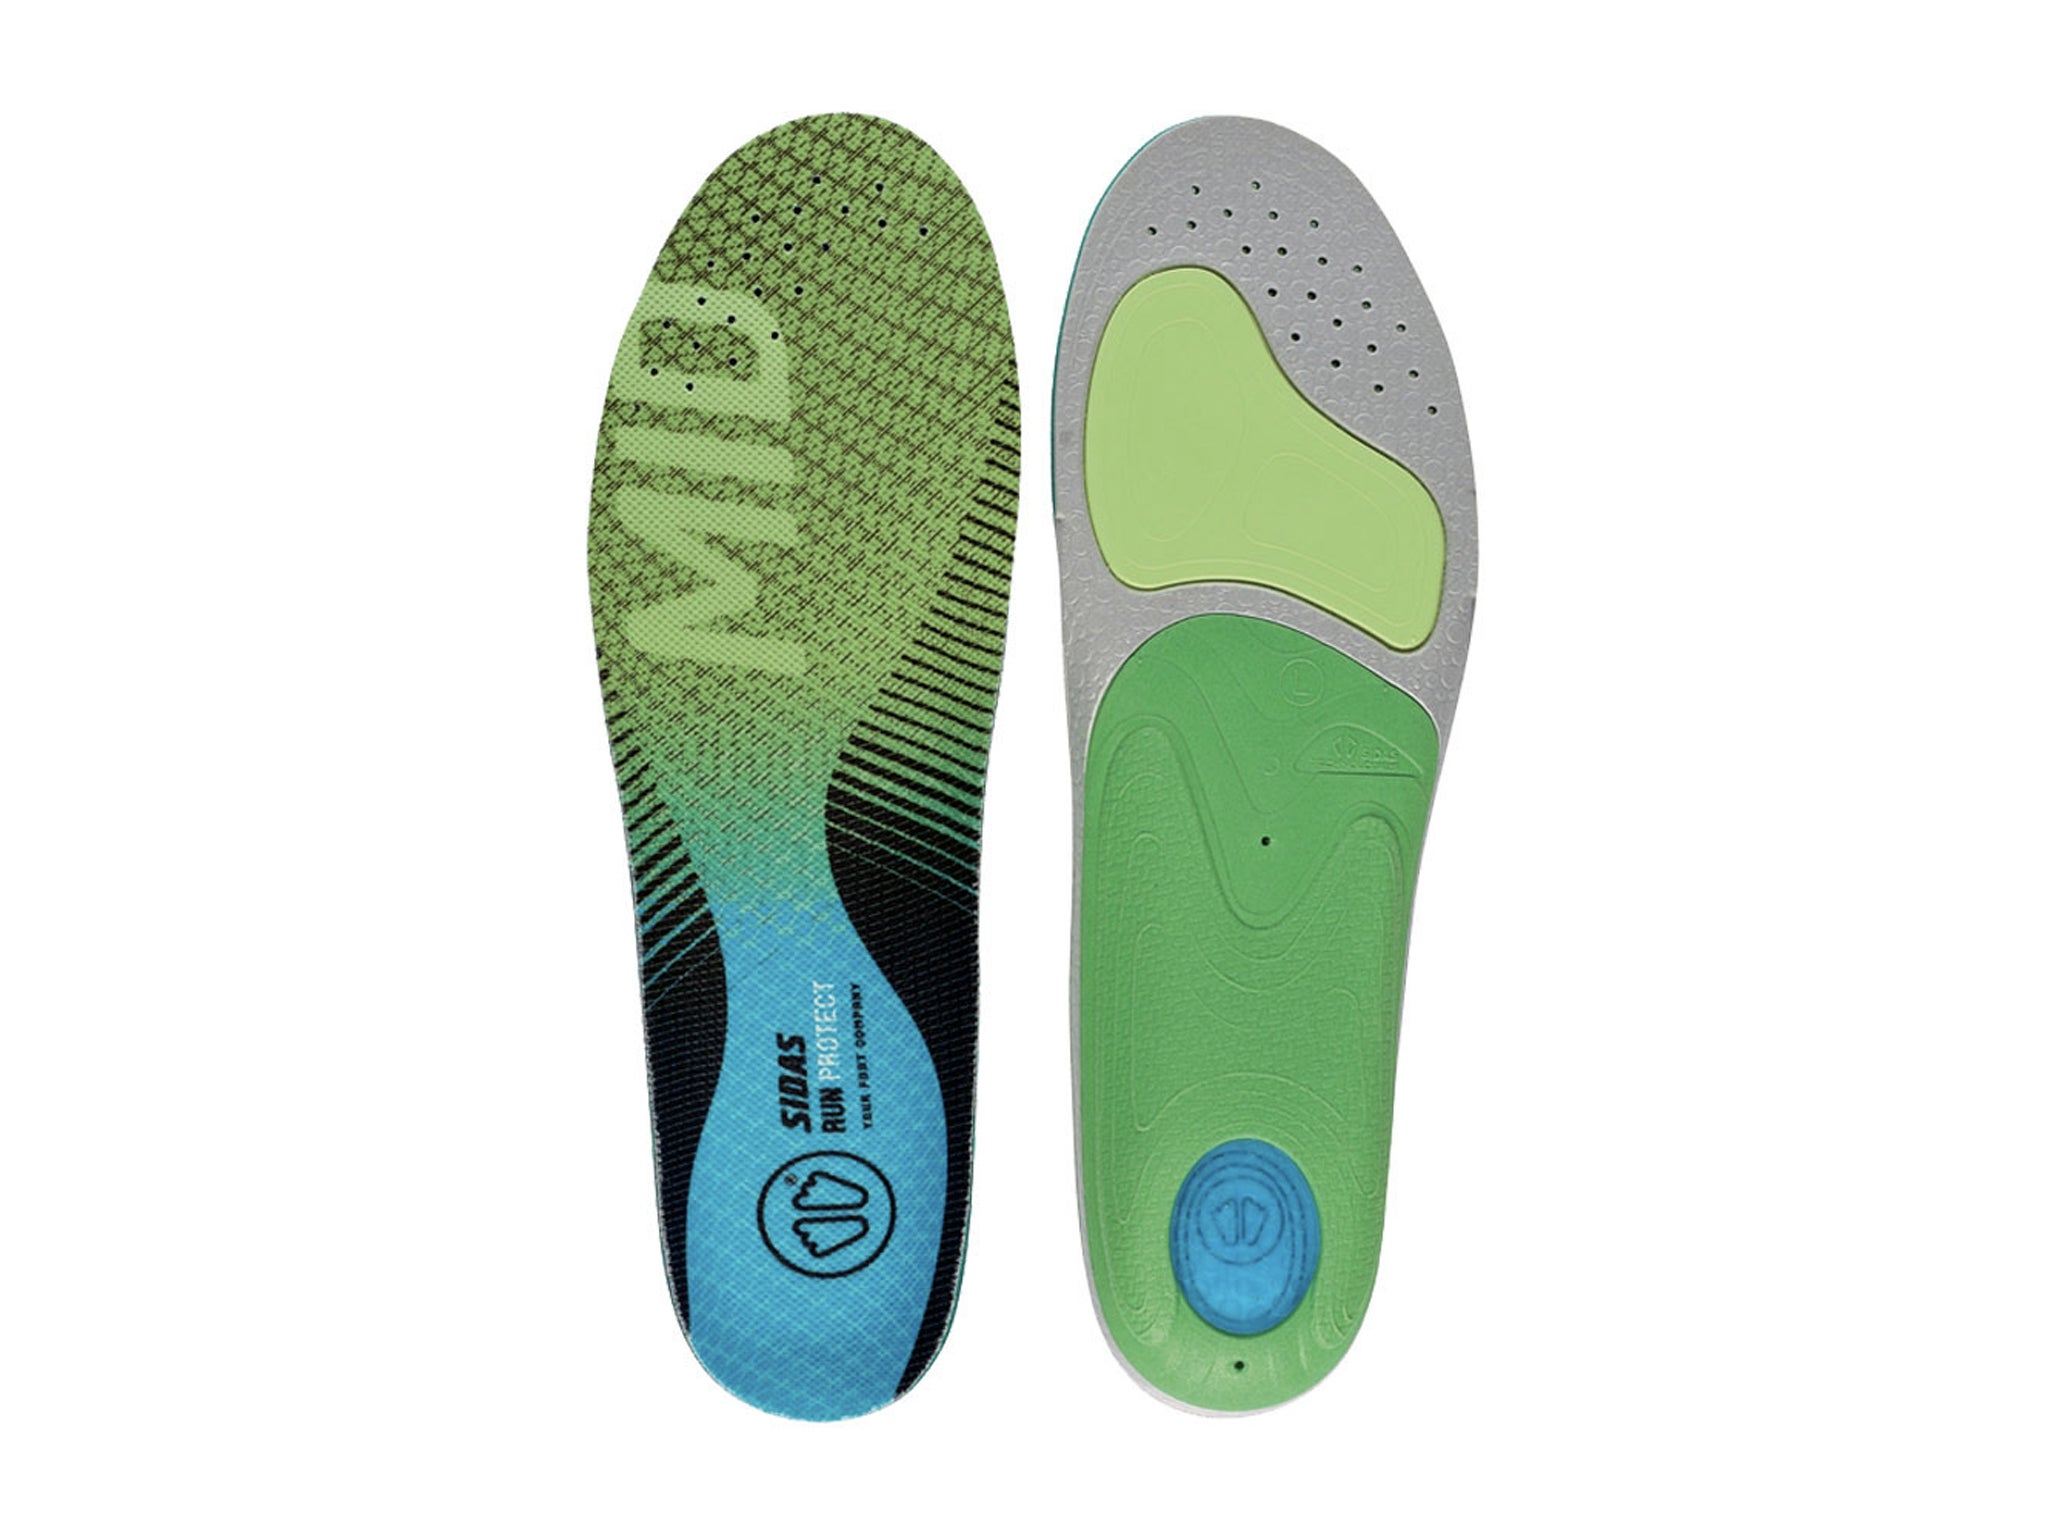 New Kanauk Unisex Thermal  Insulating Insoles  Shoes Boots One size fits most 